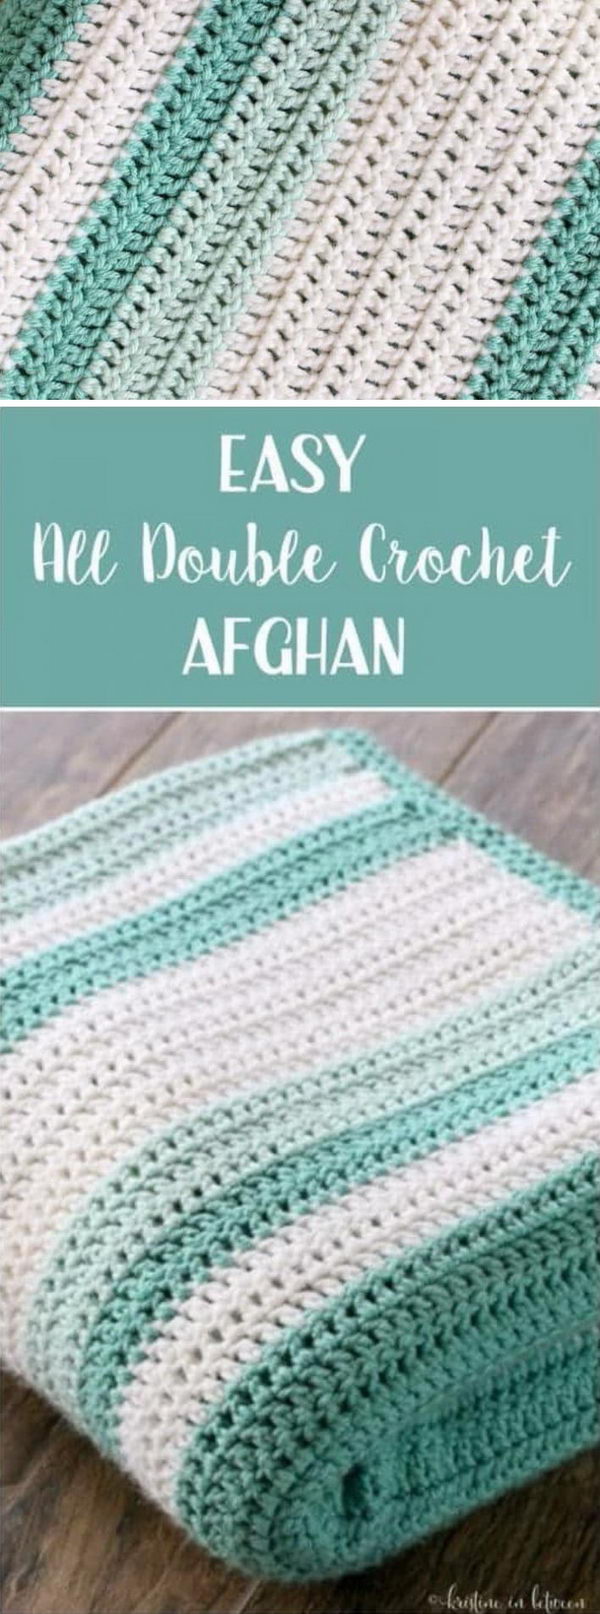 30 Free Crochet Patterns For Blankets Hative